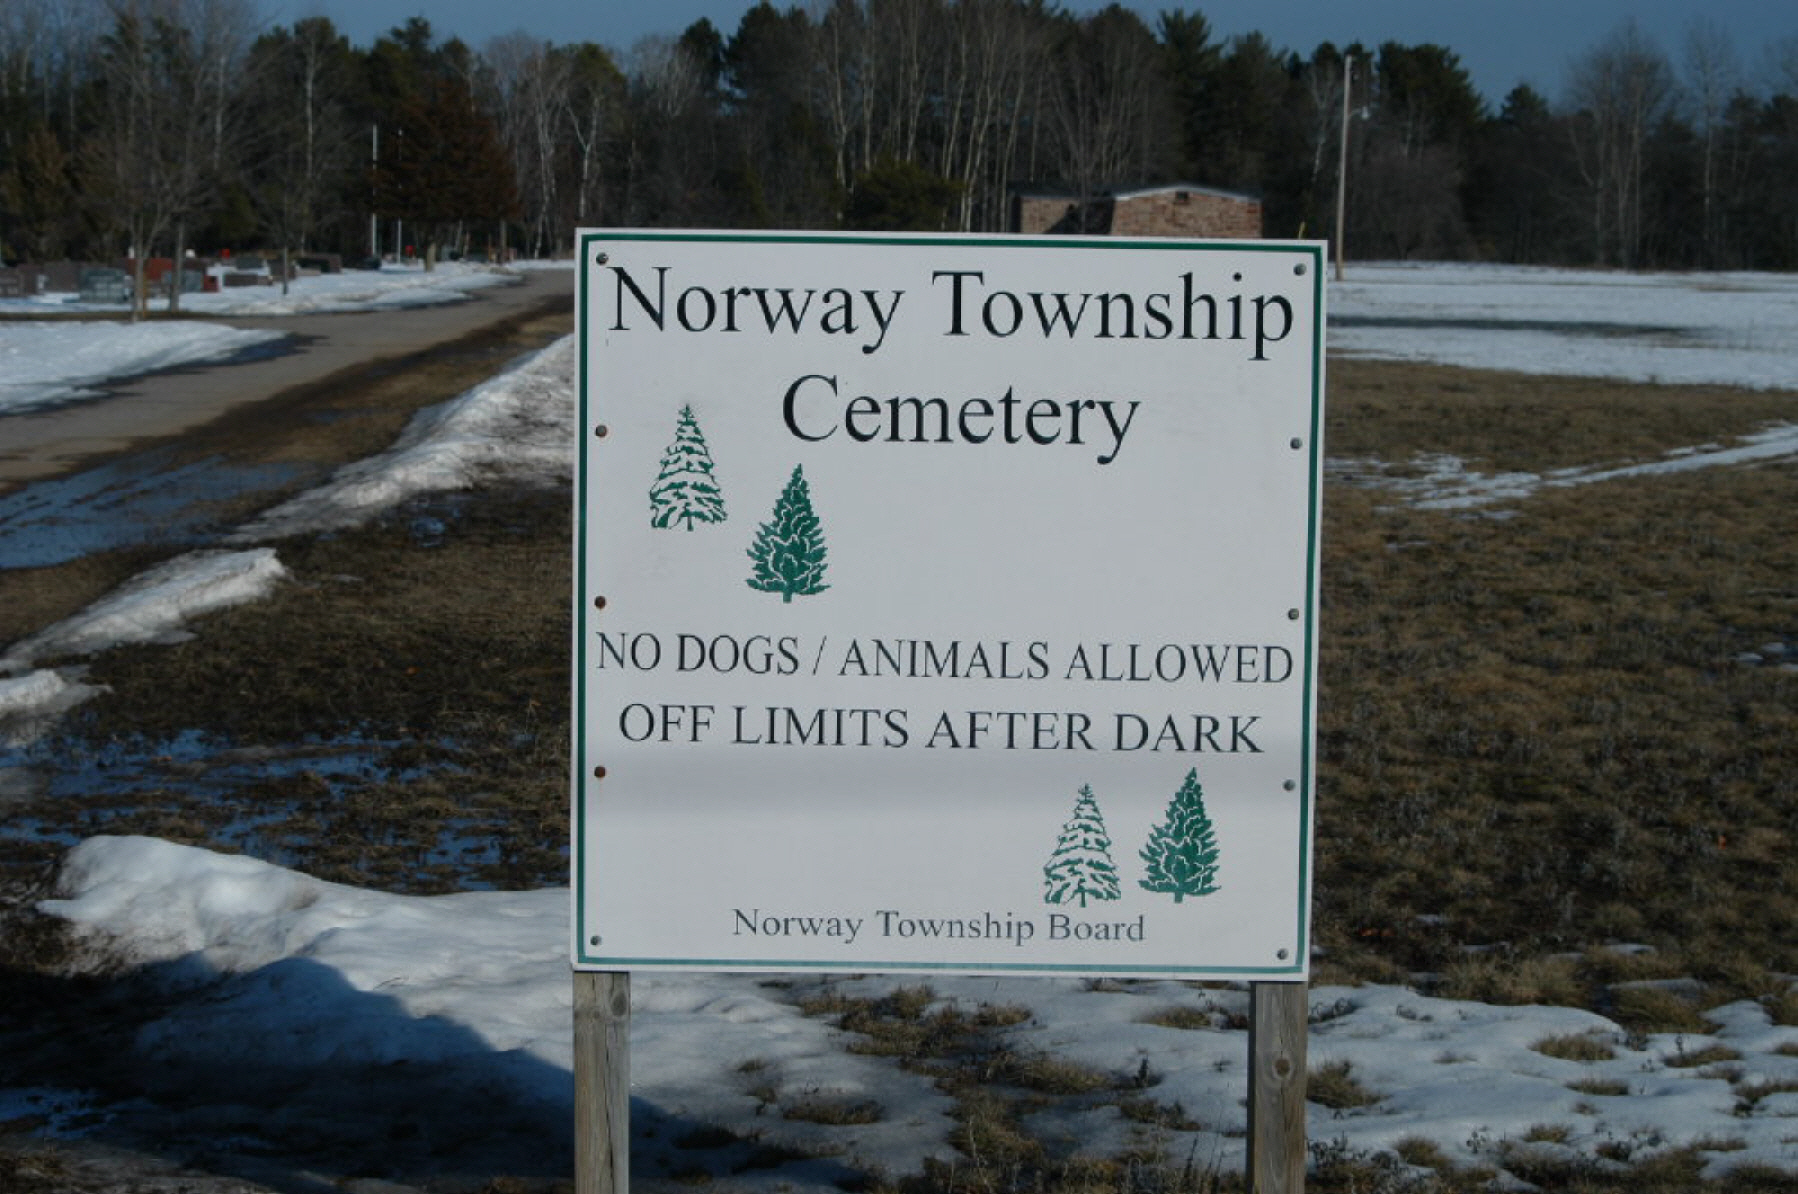 Norway Township Cemetery